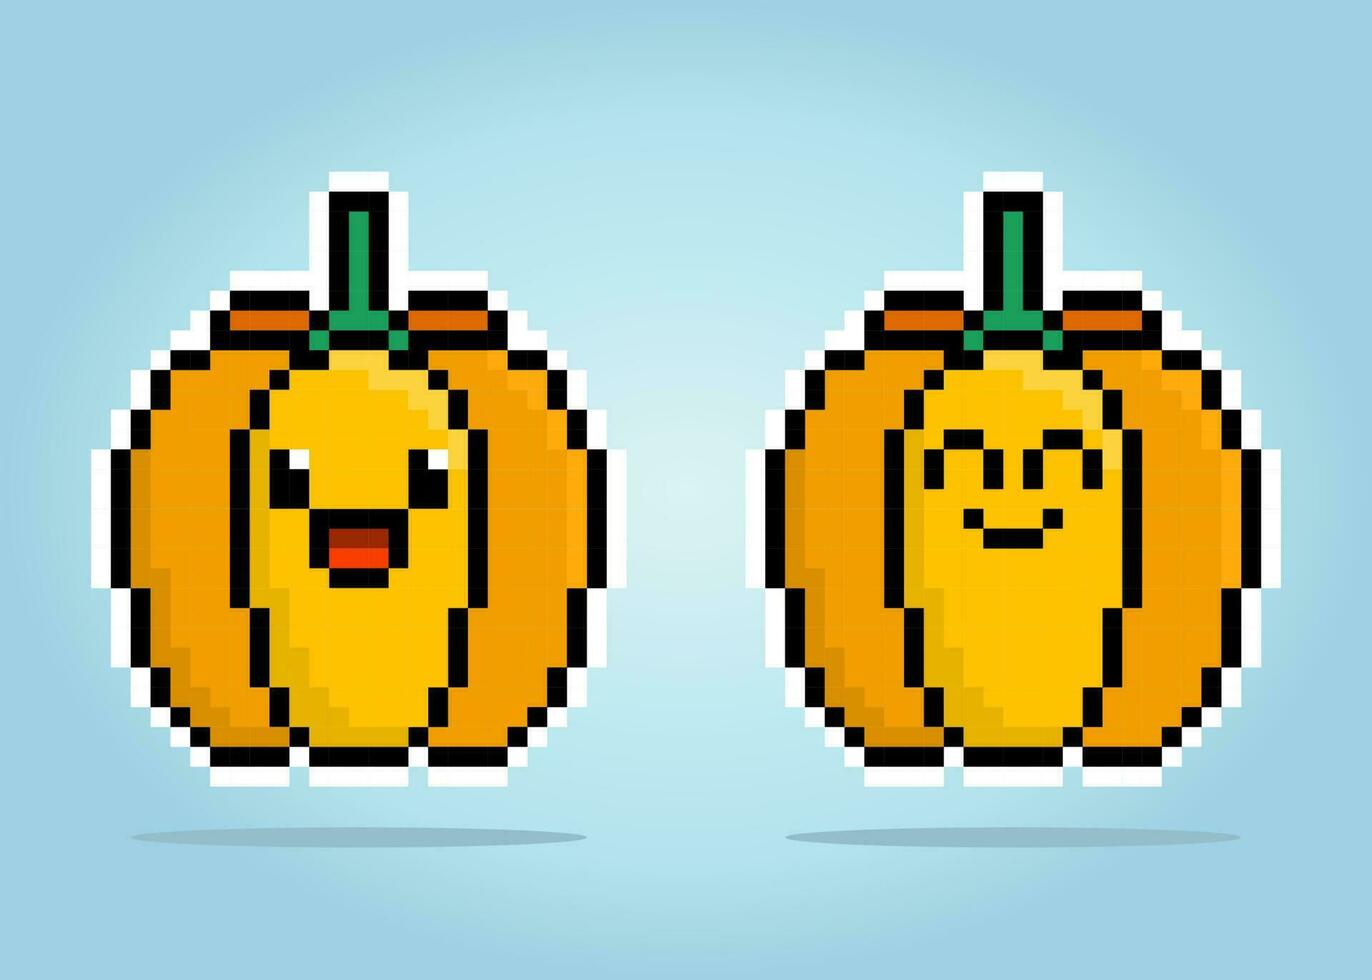 8 bit pixel of pumpkin character. Veggies for game assets and cross stitch patterns in vector illustrations.